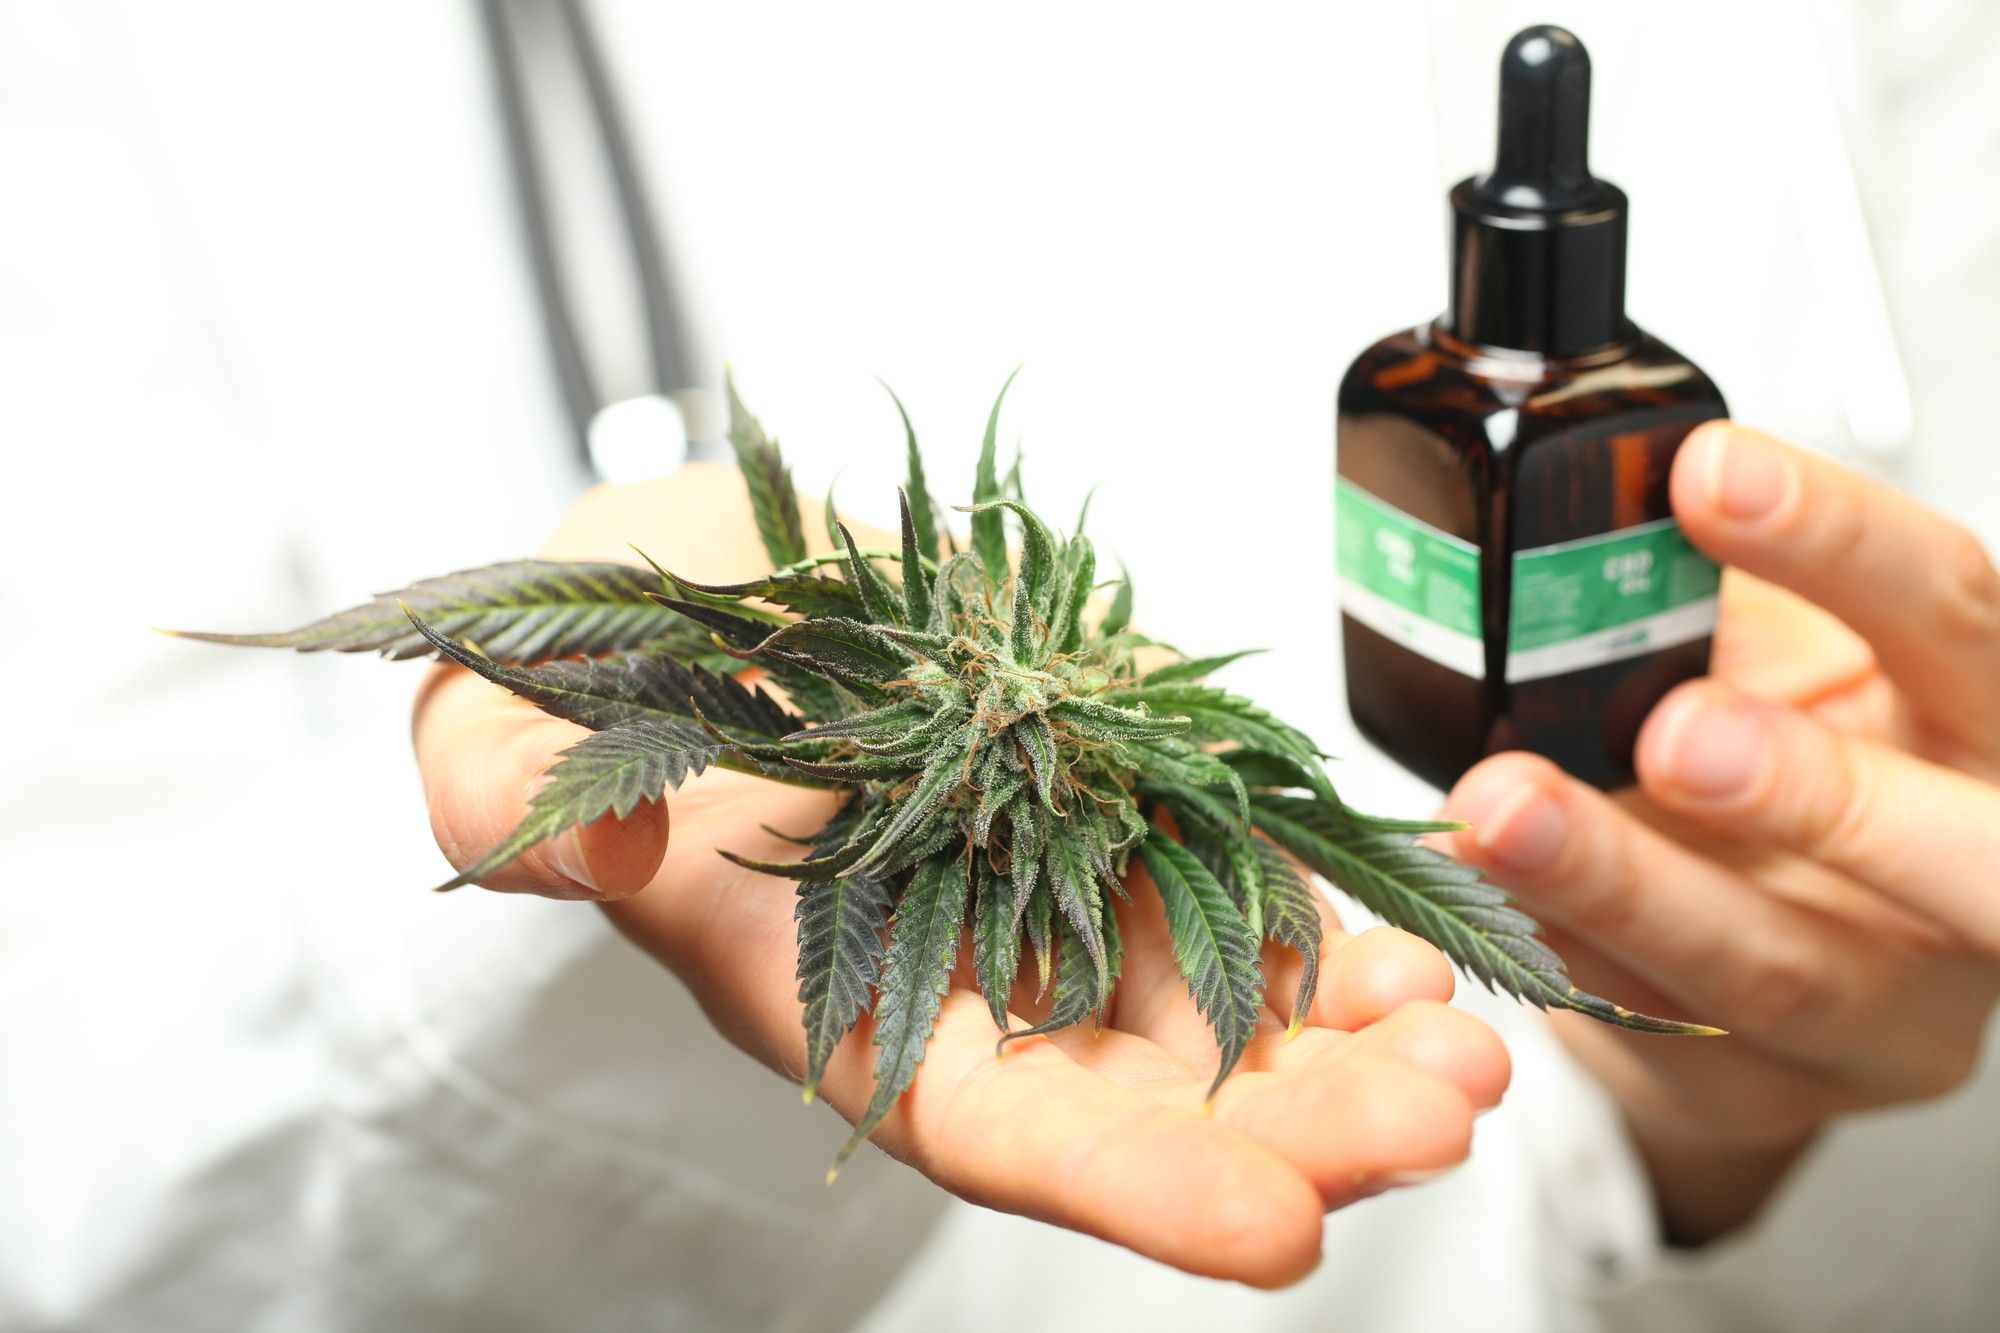 Lord Jones CBD products may be mislabeled.